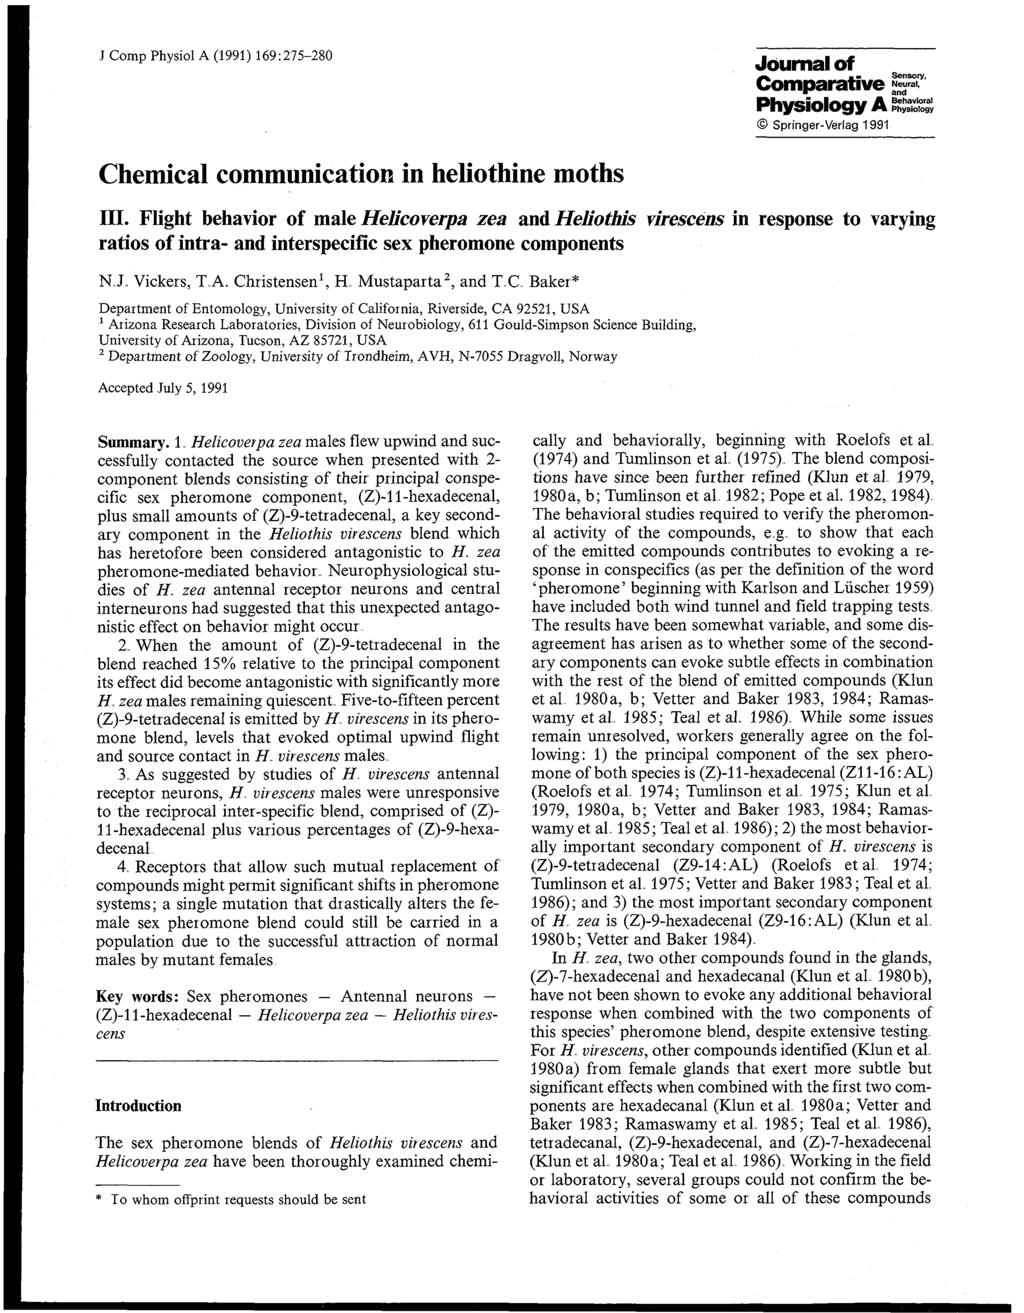 J Comp Physiol A (1991) 169:275-280 Journal of Sensory, Comparative 221, Physiology A!%2g; @ Springer-Verlag 1991 Chemical communication in heliothine moths 111.